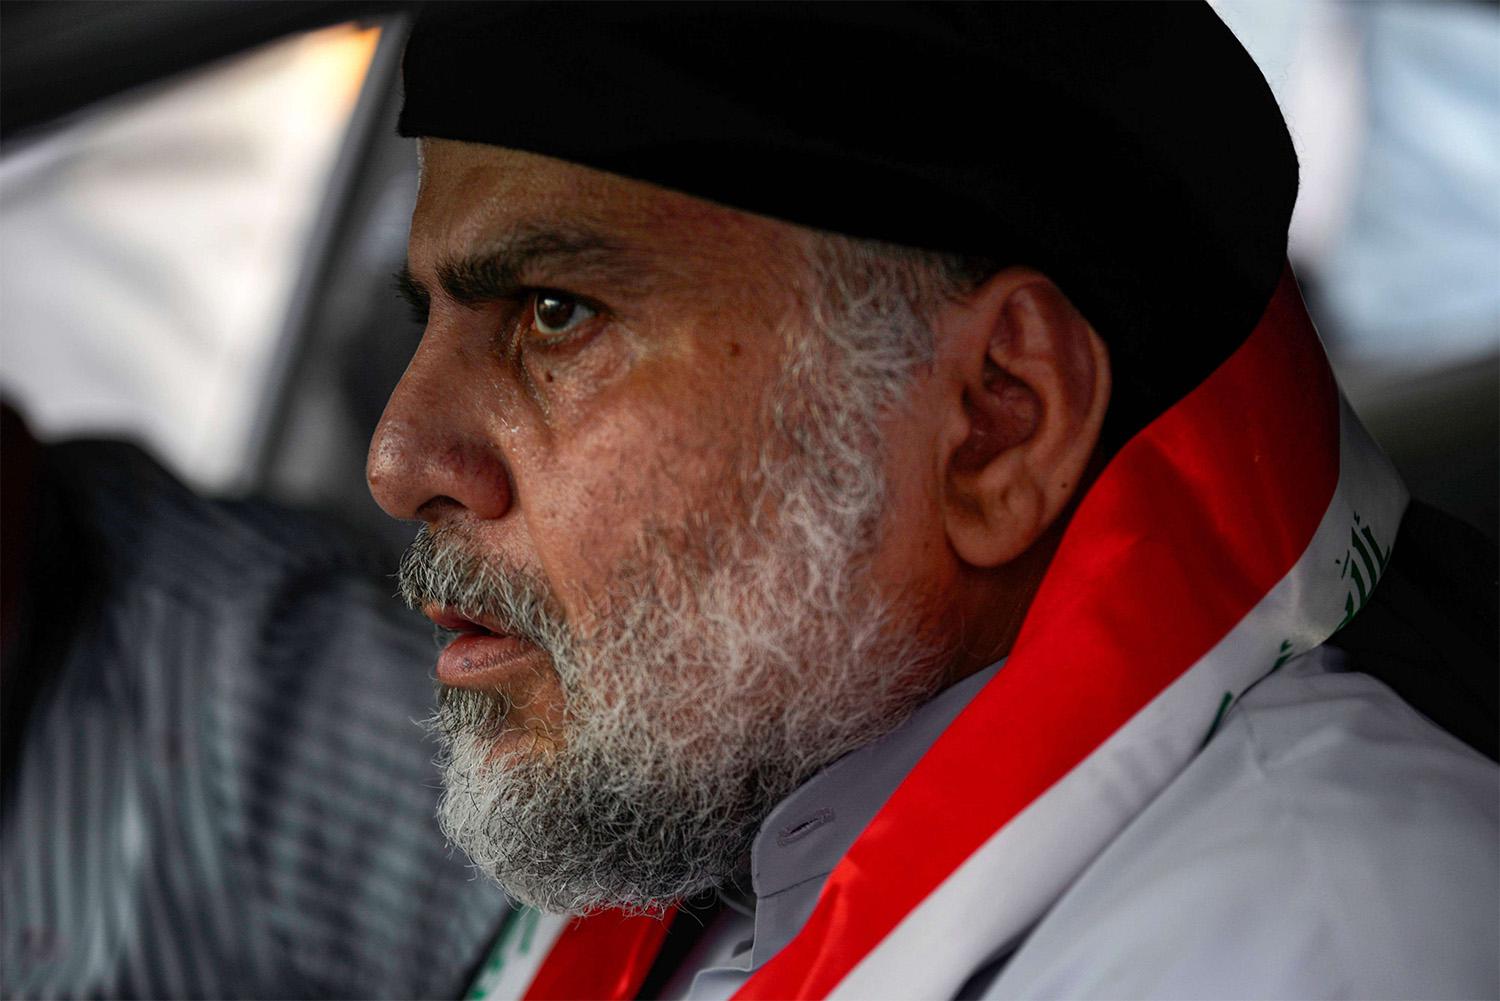 Sadr joined anti-government demonstrators in Najaf upon his arrival from Iran